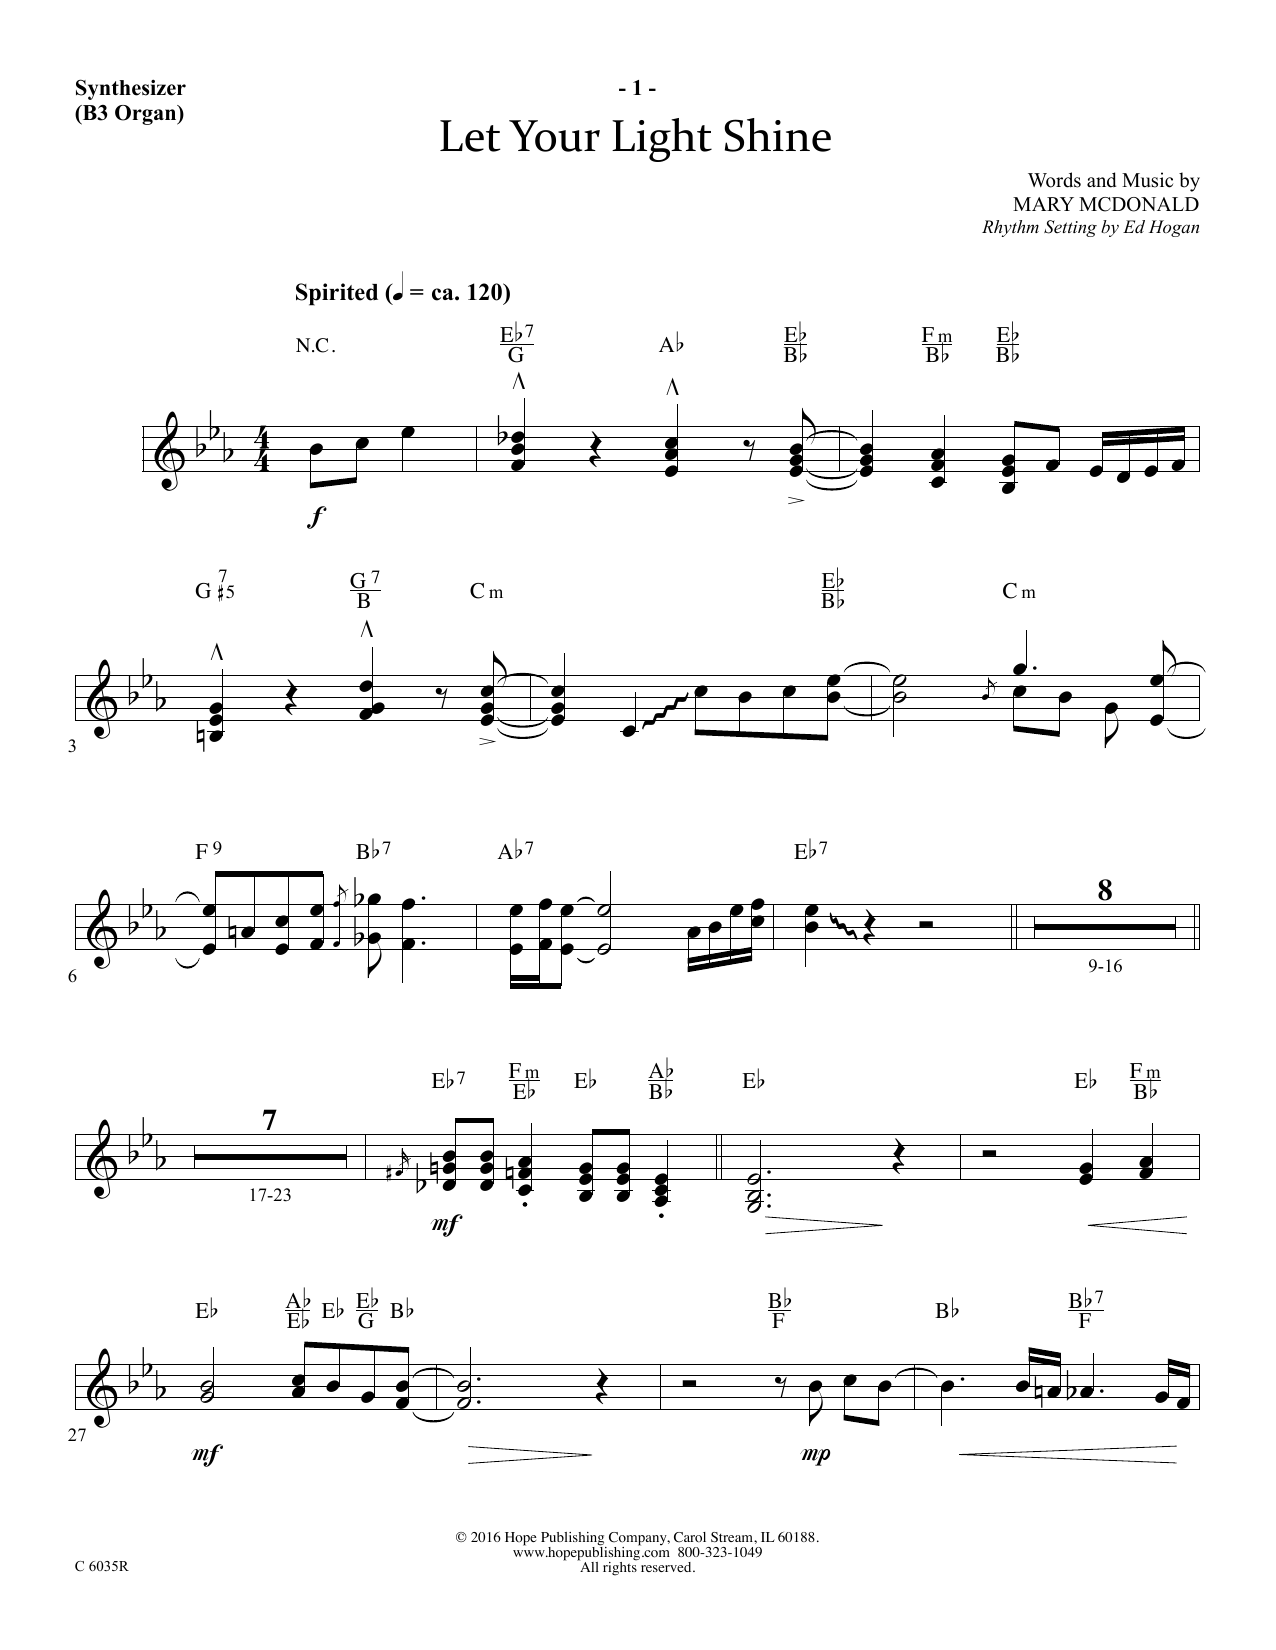 Download Mary McDonald Let Your Light Shine - Synthesizer Sheet Music